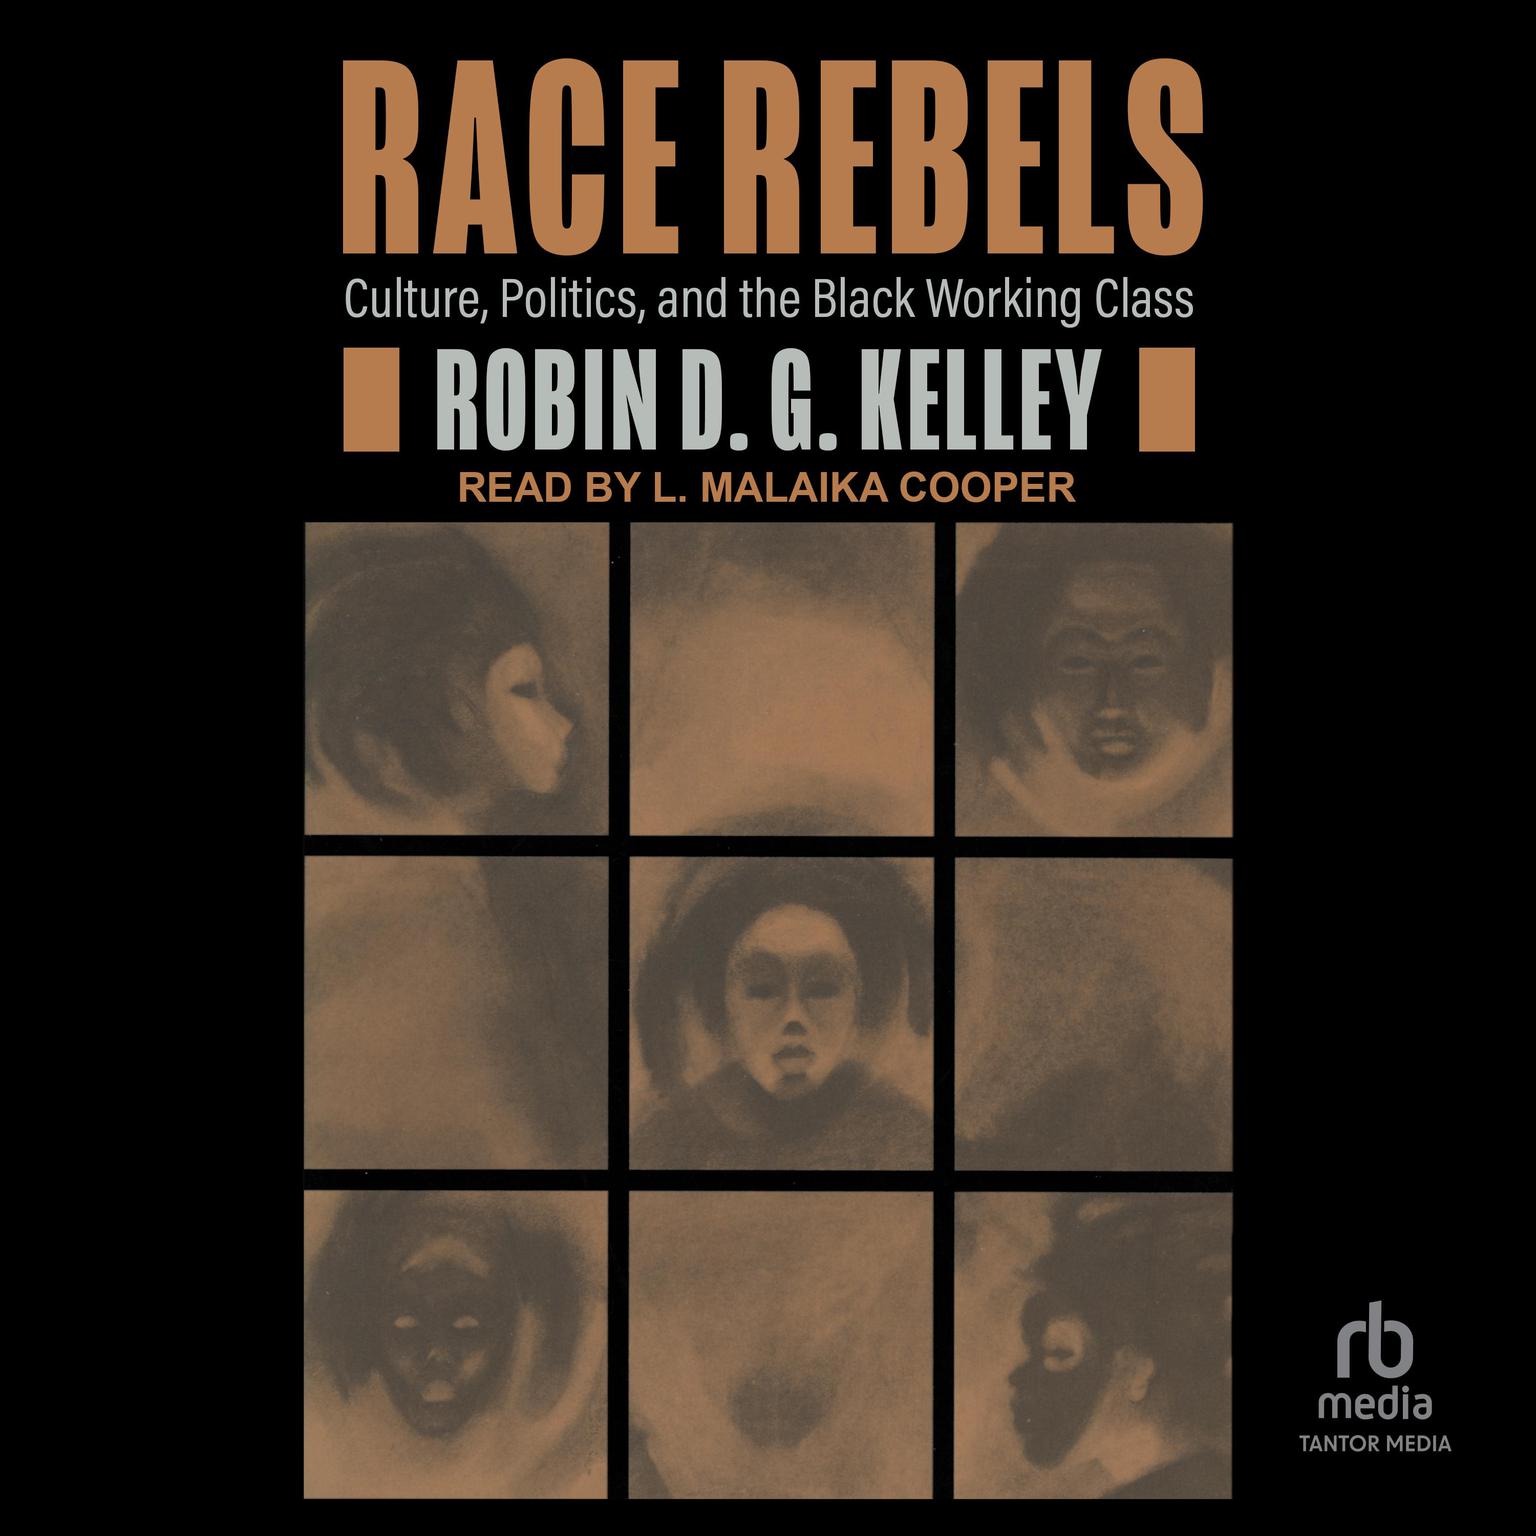 Race Rebels: Culture, Politics, and the Black Working Class Audiobook, by Robin D. G. Kelley